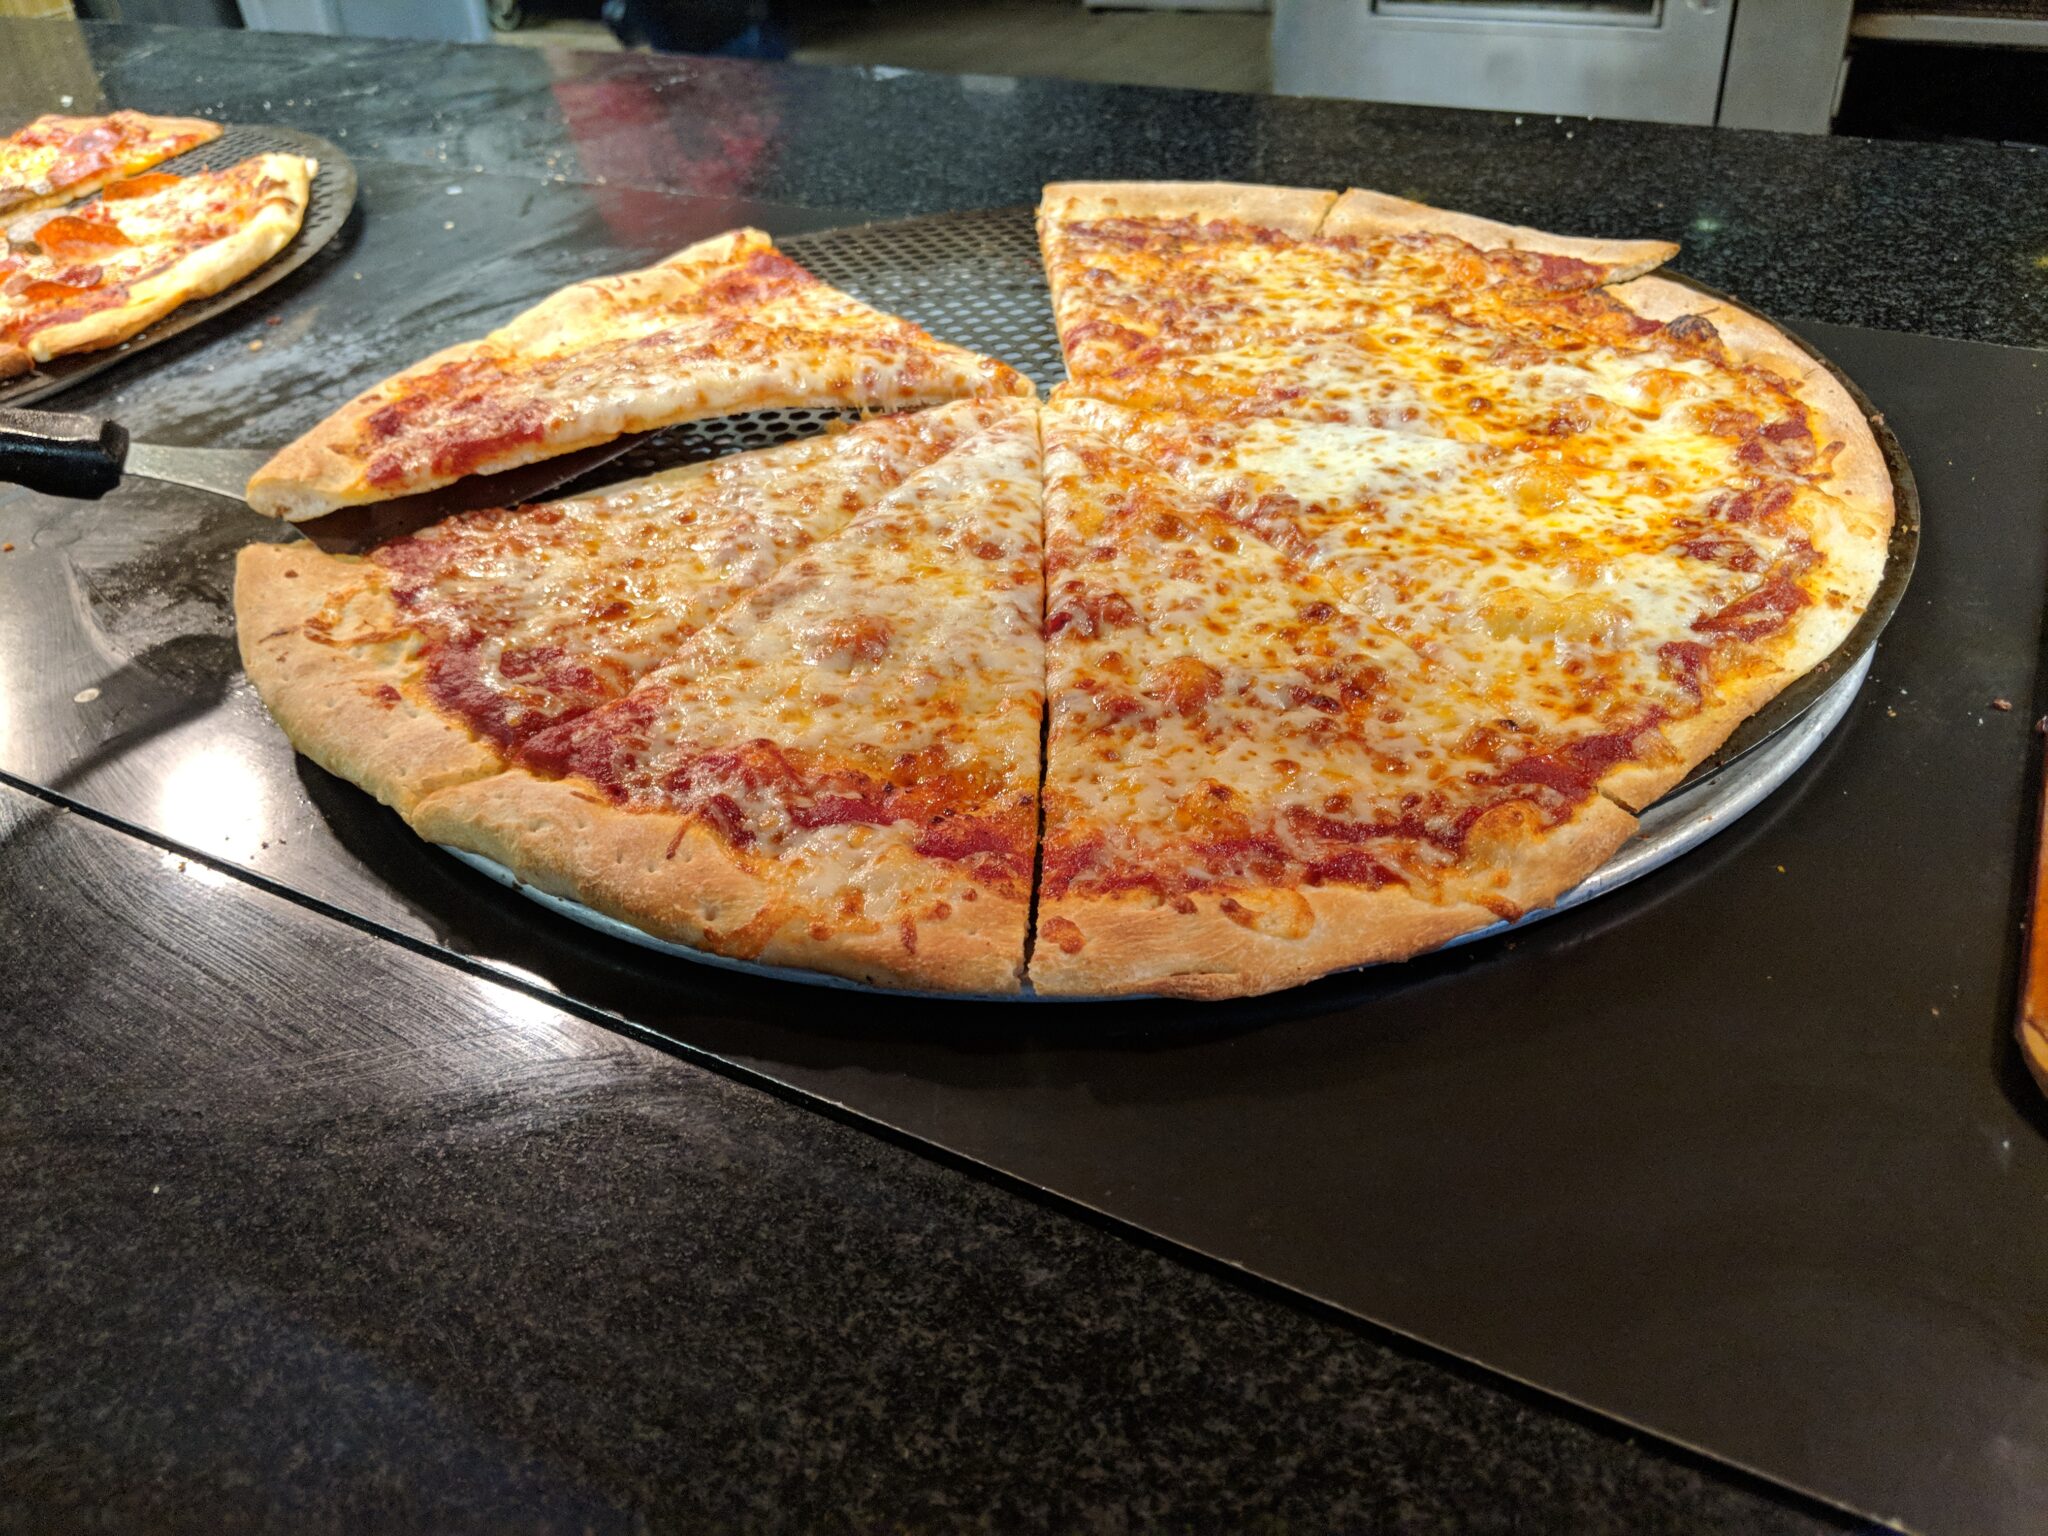 The World's Largest Cici's Pizza serves up fresh, hot pizza every time.